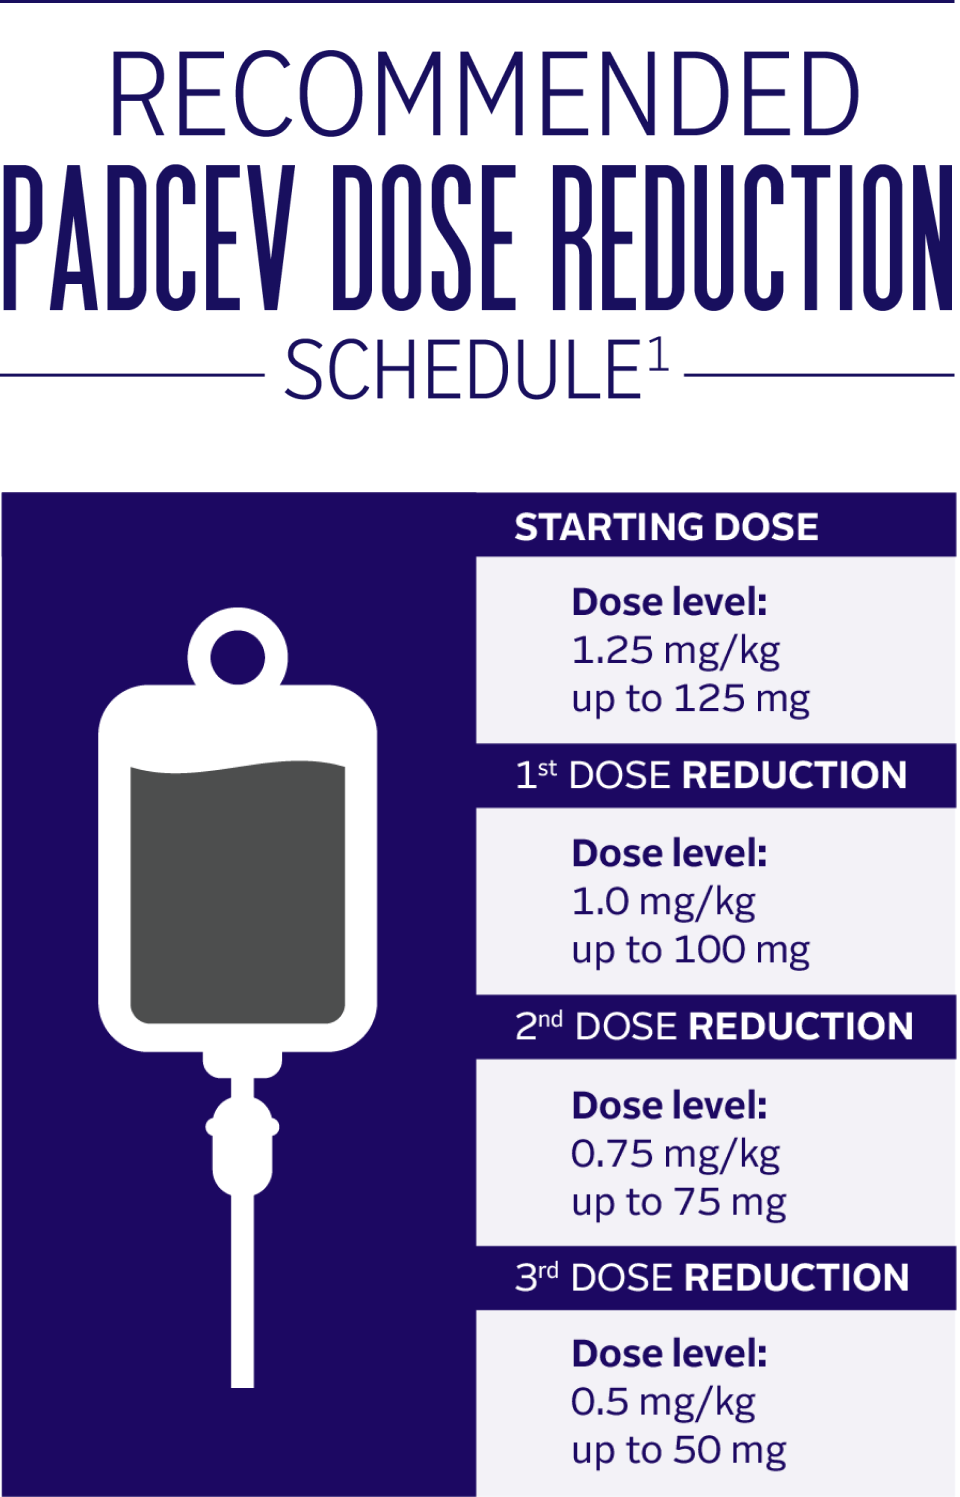 RECOMMENDED PADCEV DOSE REDUCTION SCHEDULE1. STARTING DOSE: Dose level: 1.25 mg/kg up to 125 mg. 1st DOSE REDUCTION: Dose level: 1.0 mg/kg up to 100 mg. 2nd DOSE REDUCTION: Dose level: 0.75 mg/kg up to 75 mg. 3rd DOSE REDUCTION: Dose level: 0.5 mg/kg up to 50 mg.